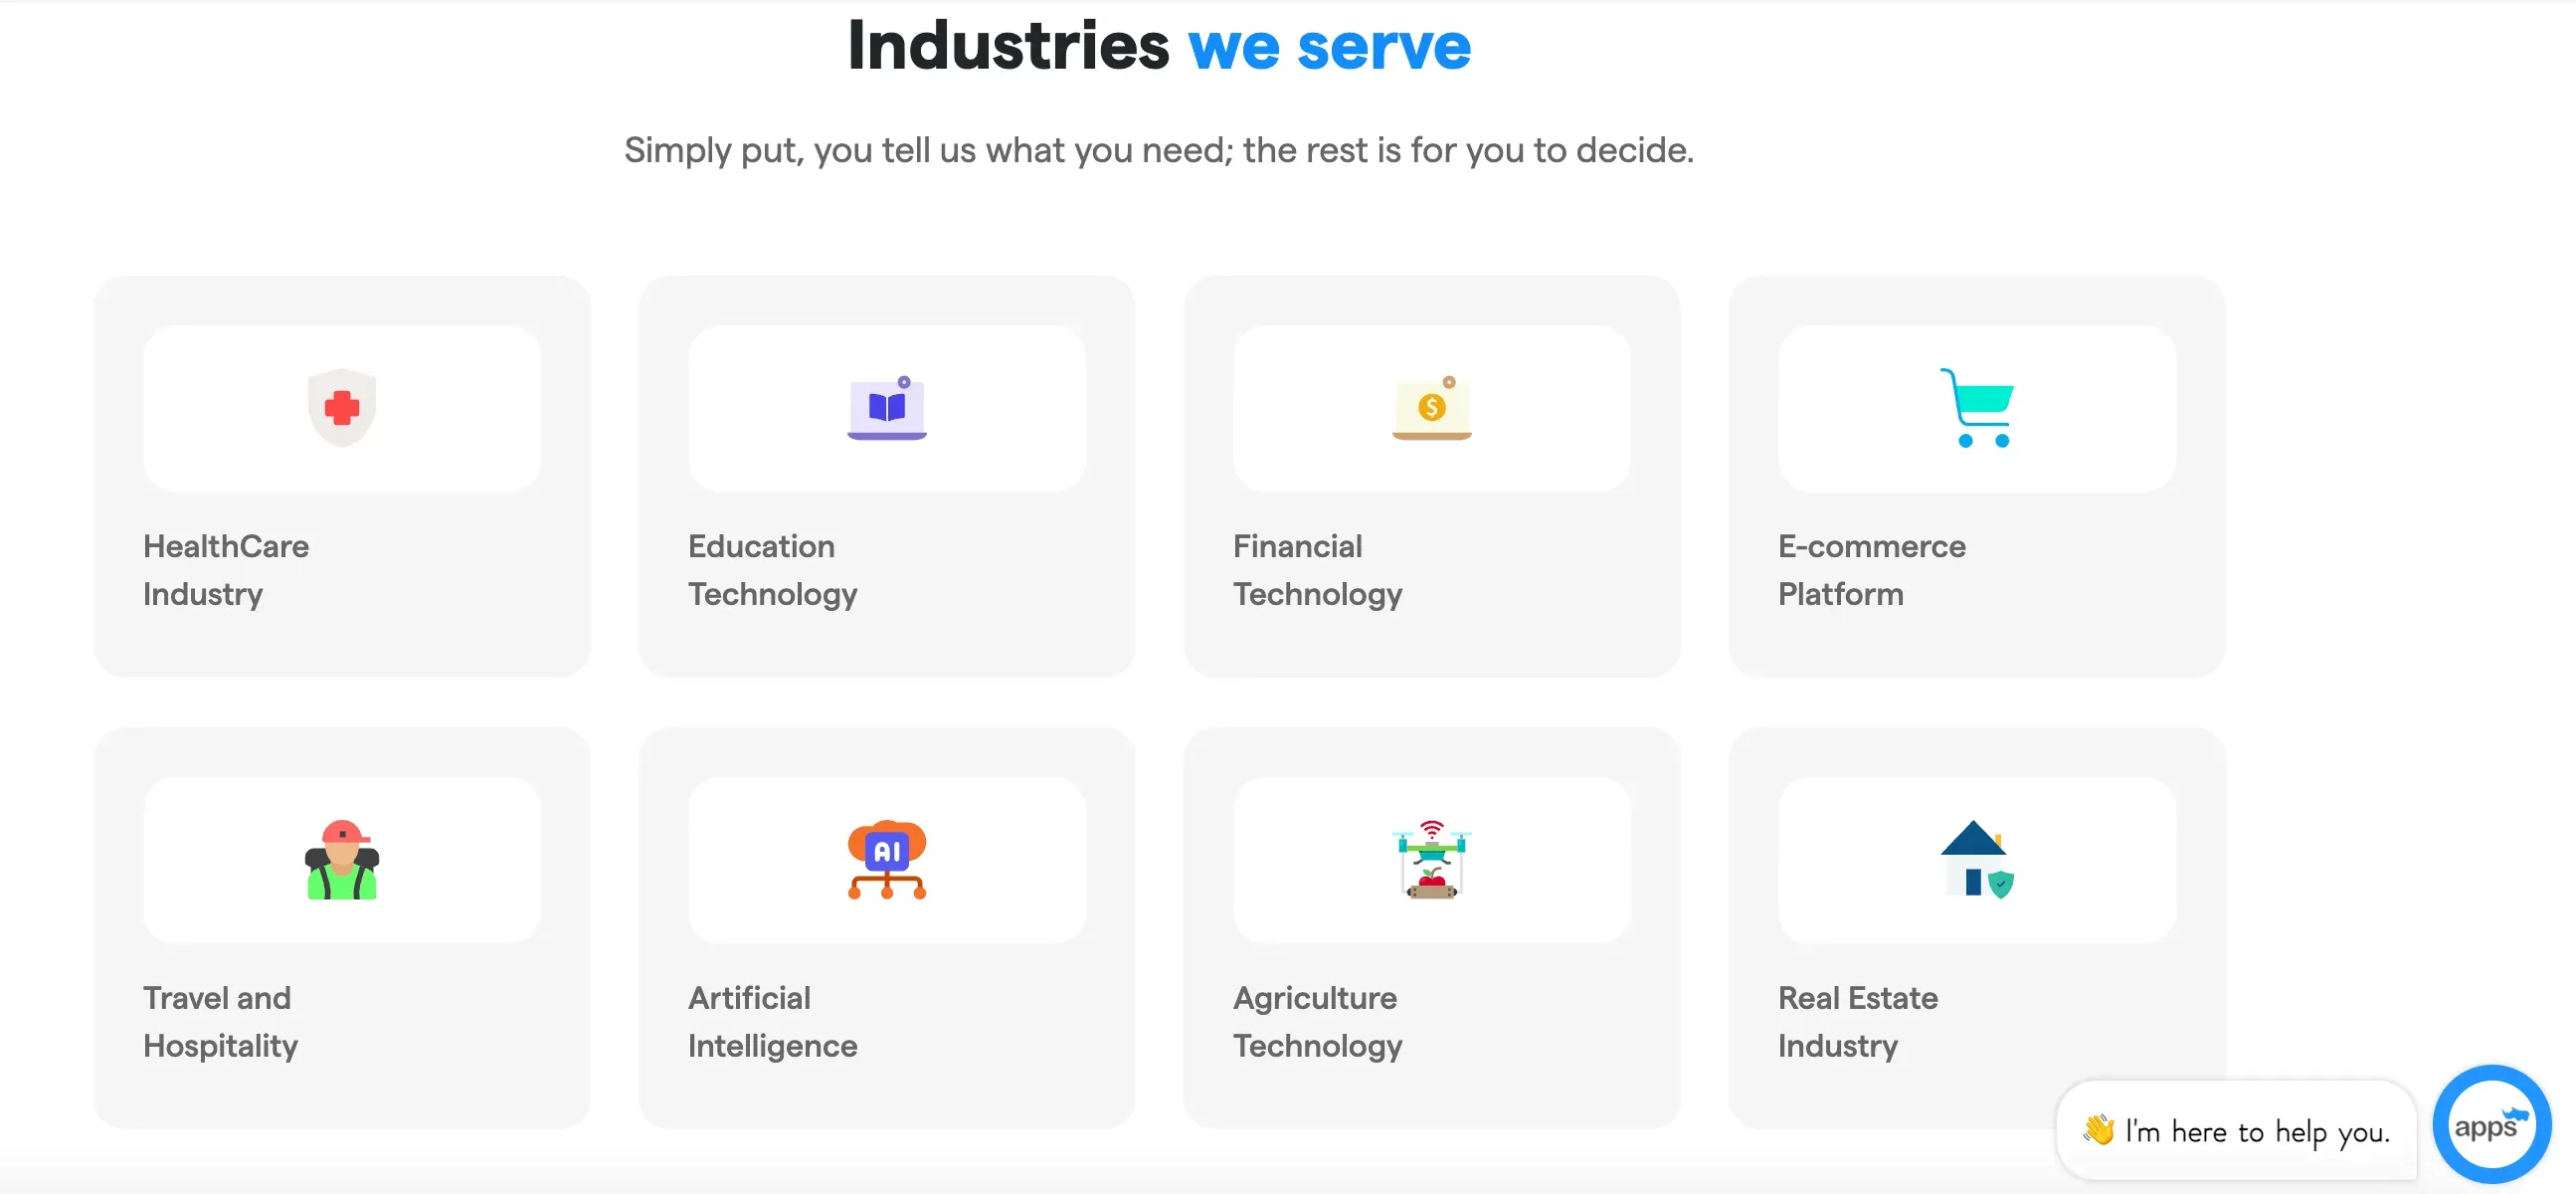 AppsRhino's serves different types of industries